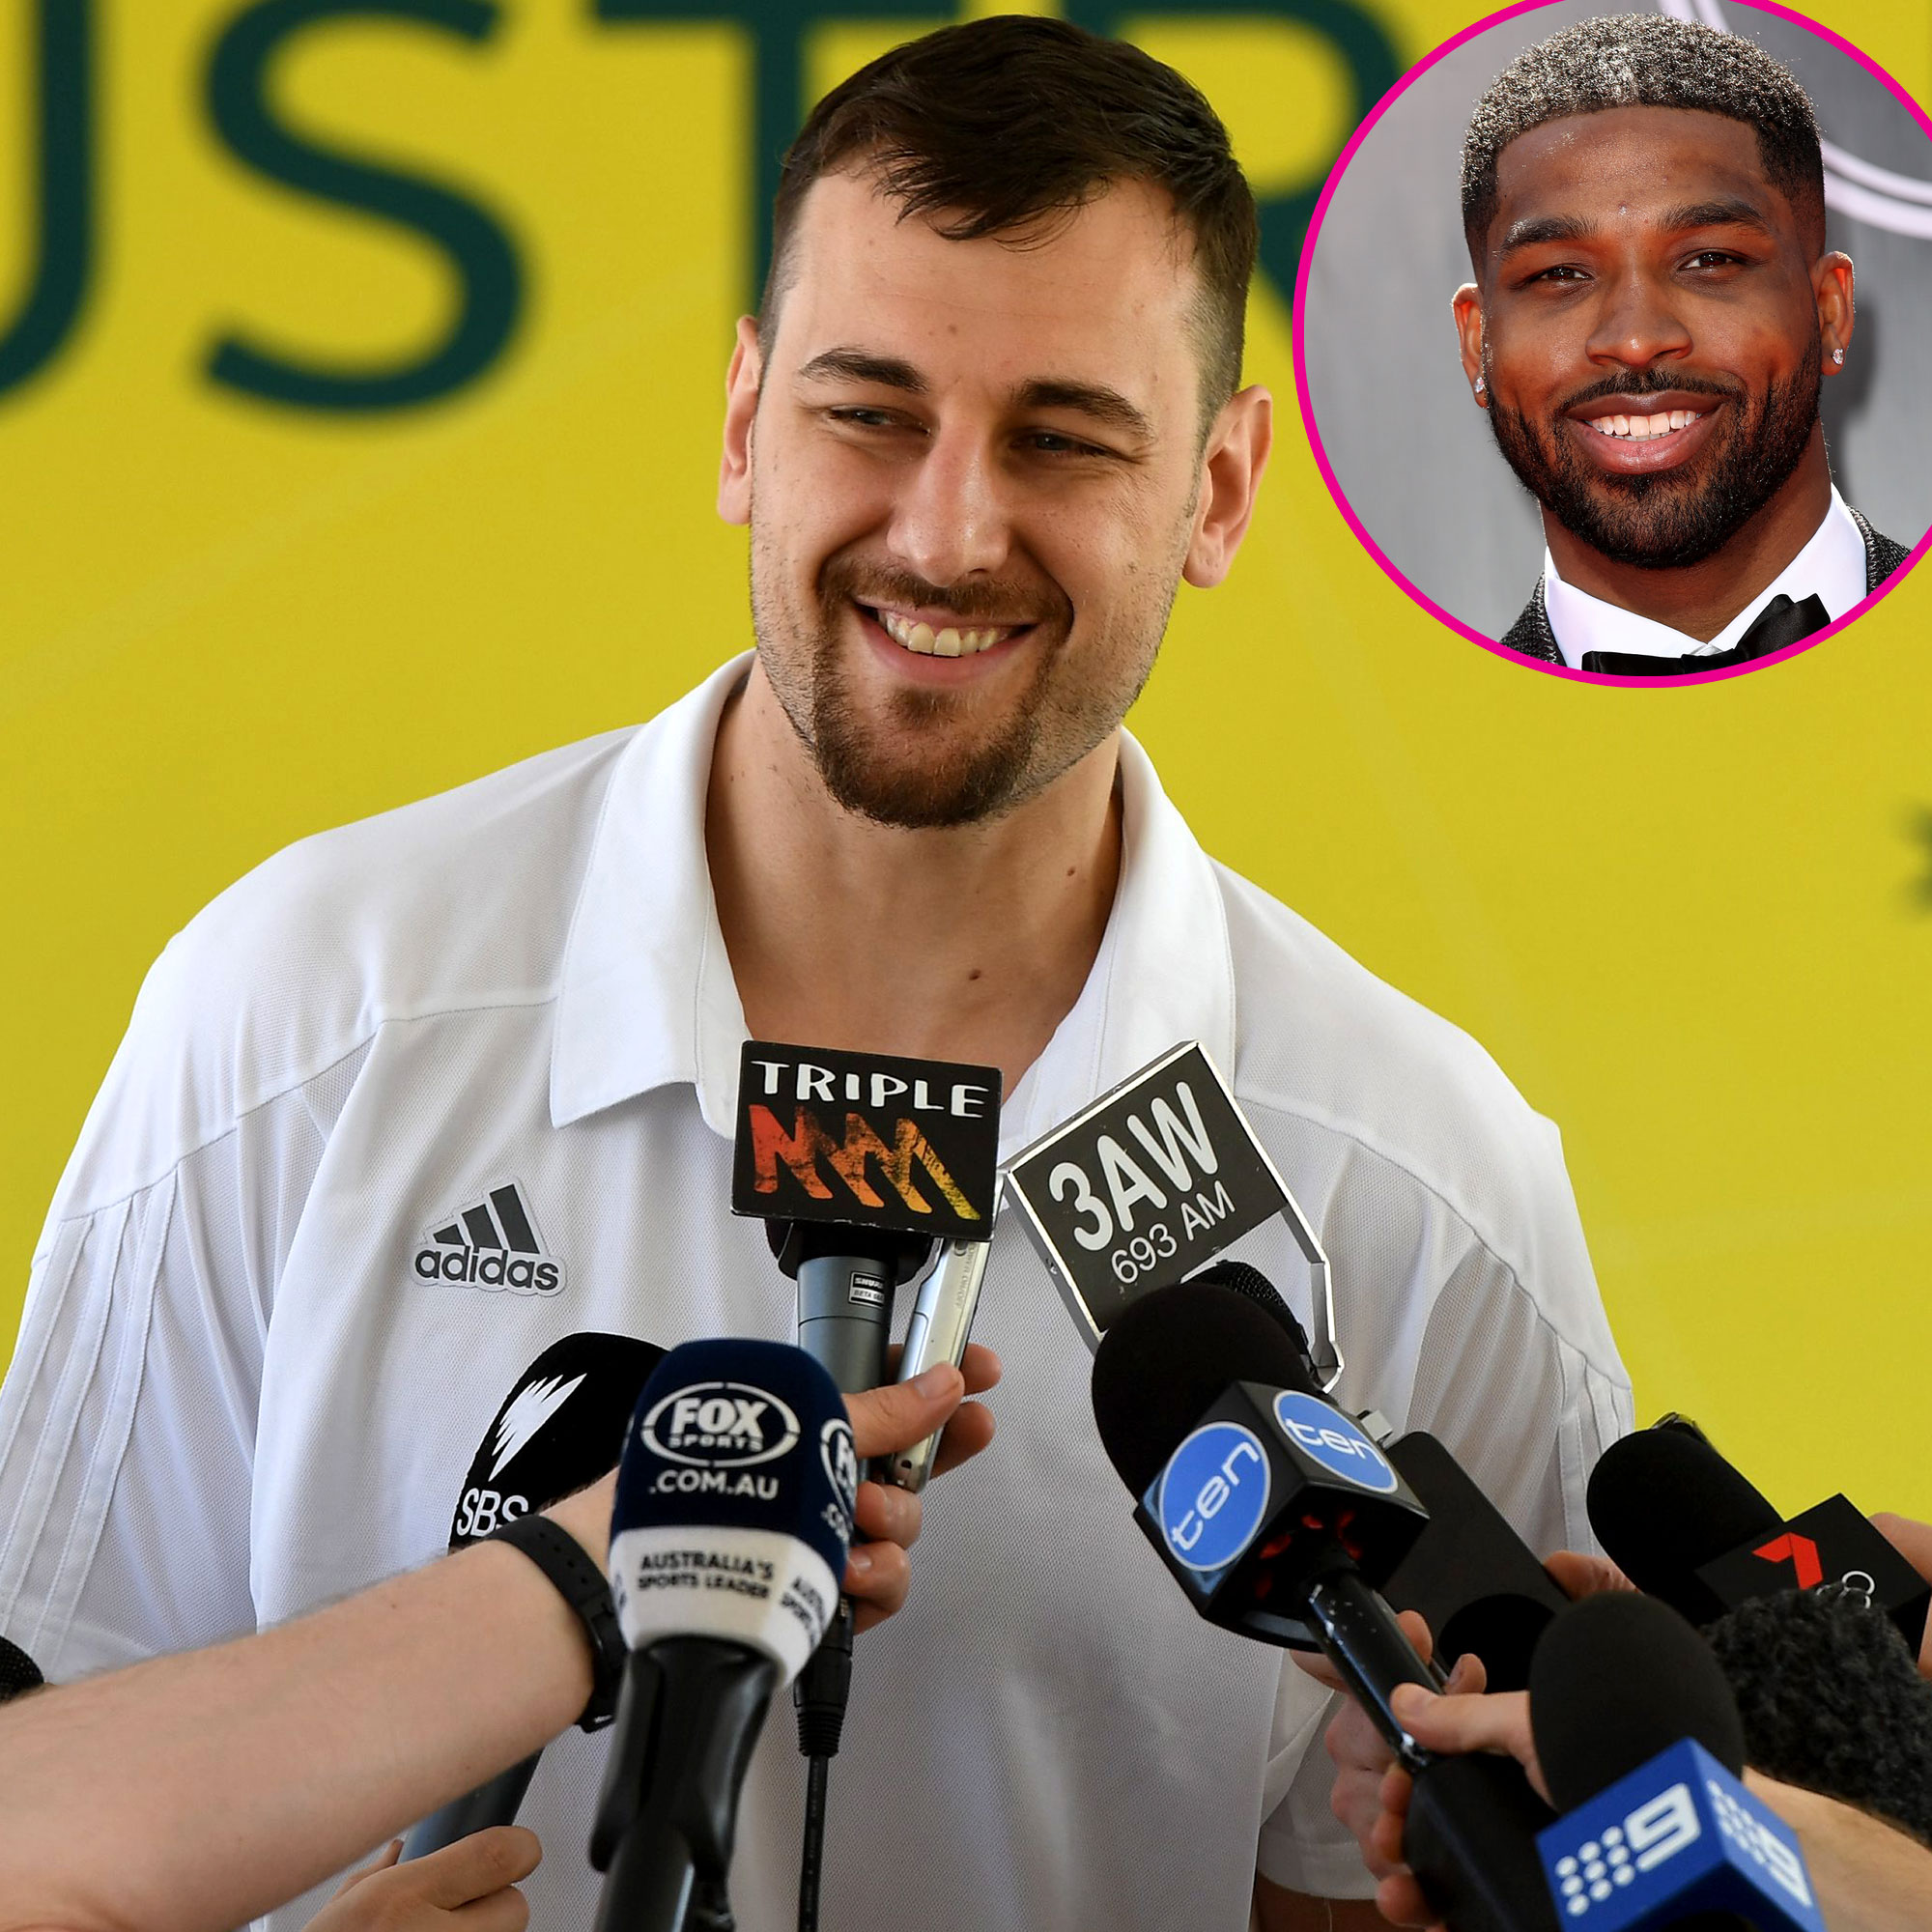 Andrew Bogut loses it over gender question for 6-year-old son